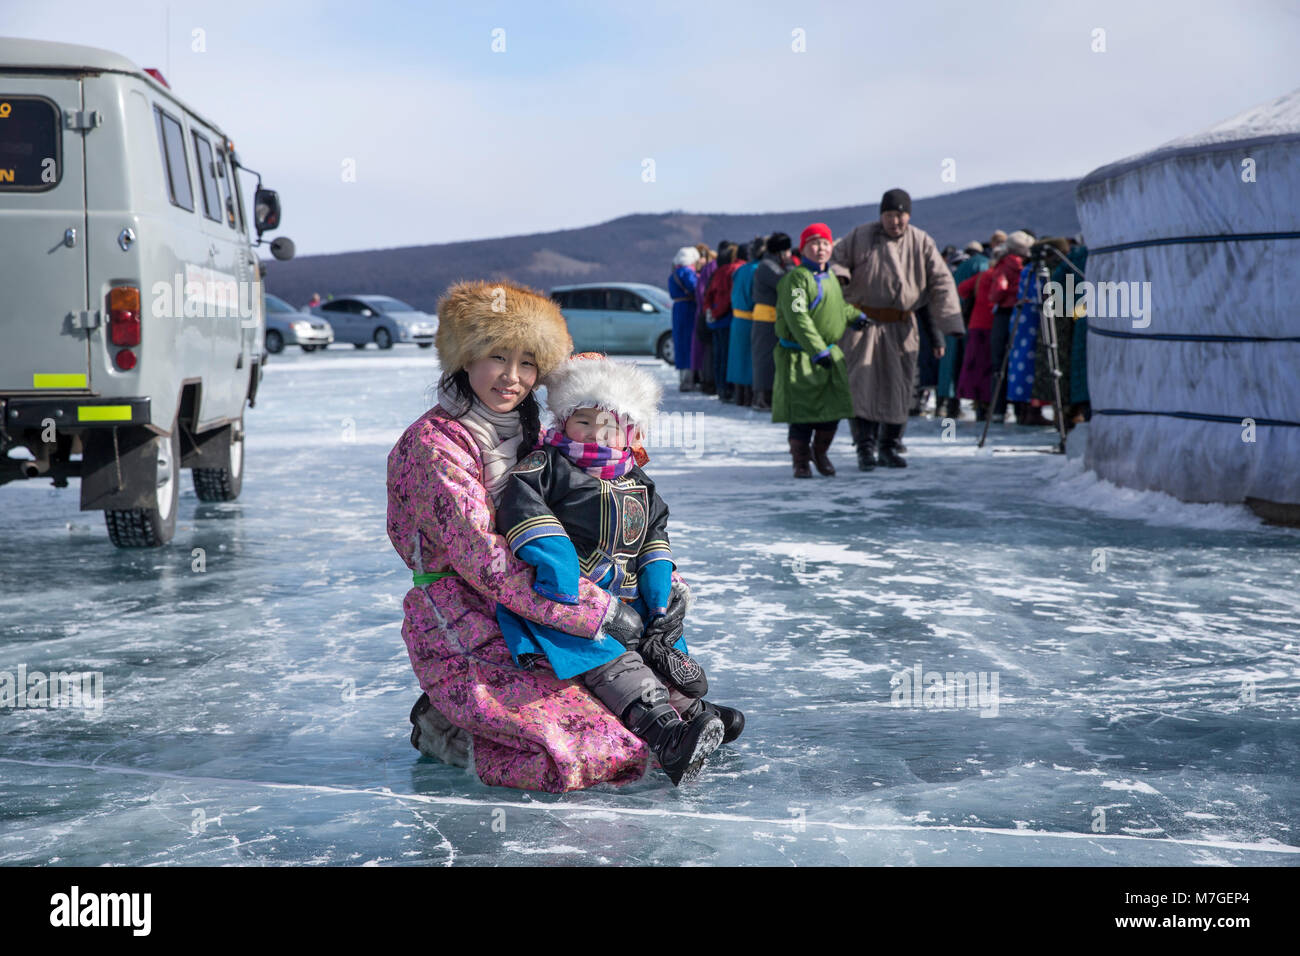 Hatgal, Mongolia, 4th March 2018: mongolian kids dressed in traditional clothing on a frozen lake Khuvsgul Stock Photo